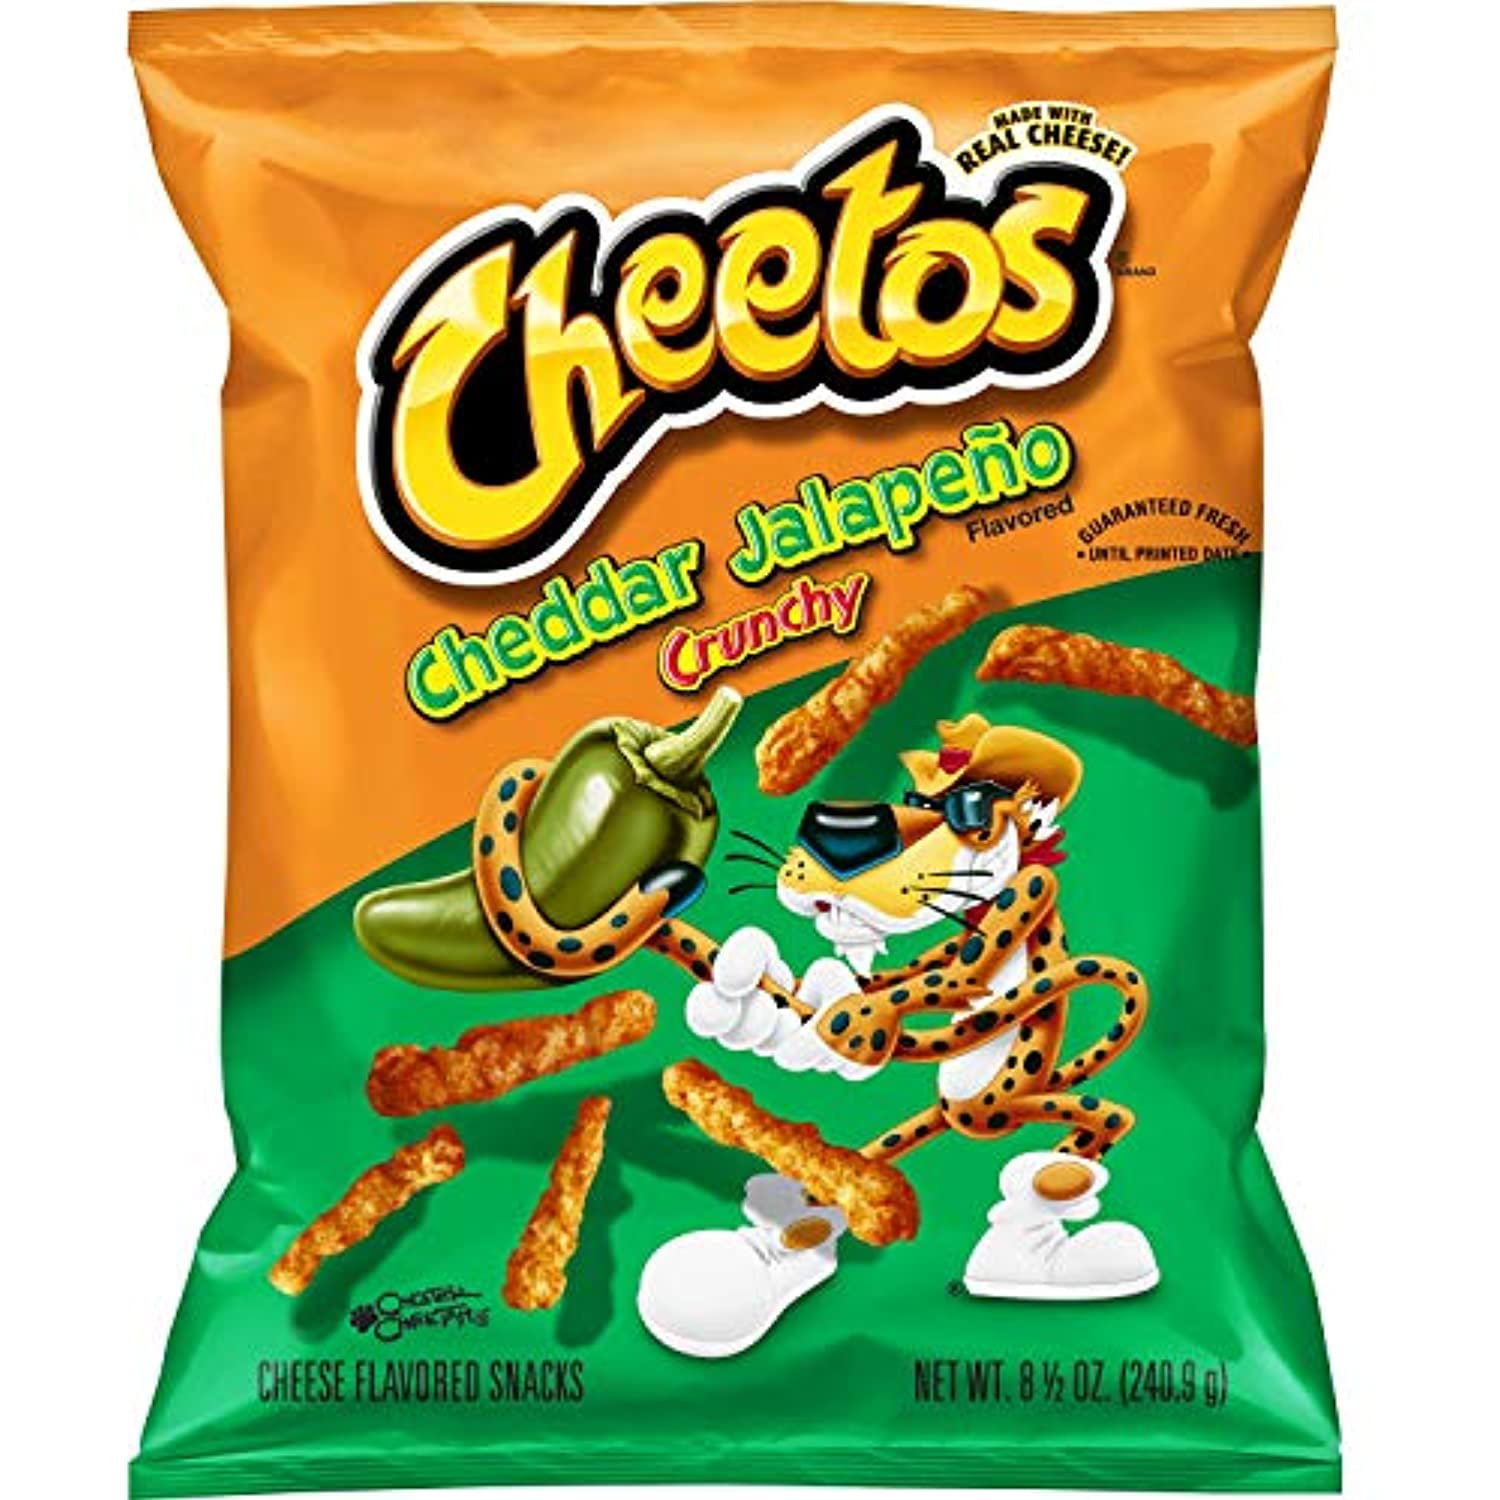 Cheetos Crunchy Cheddar Jalapeño Cheese Flavored Snacks 8 5 Ounce